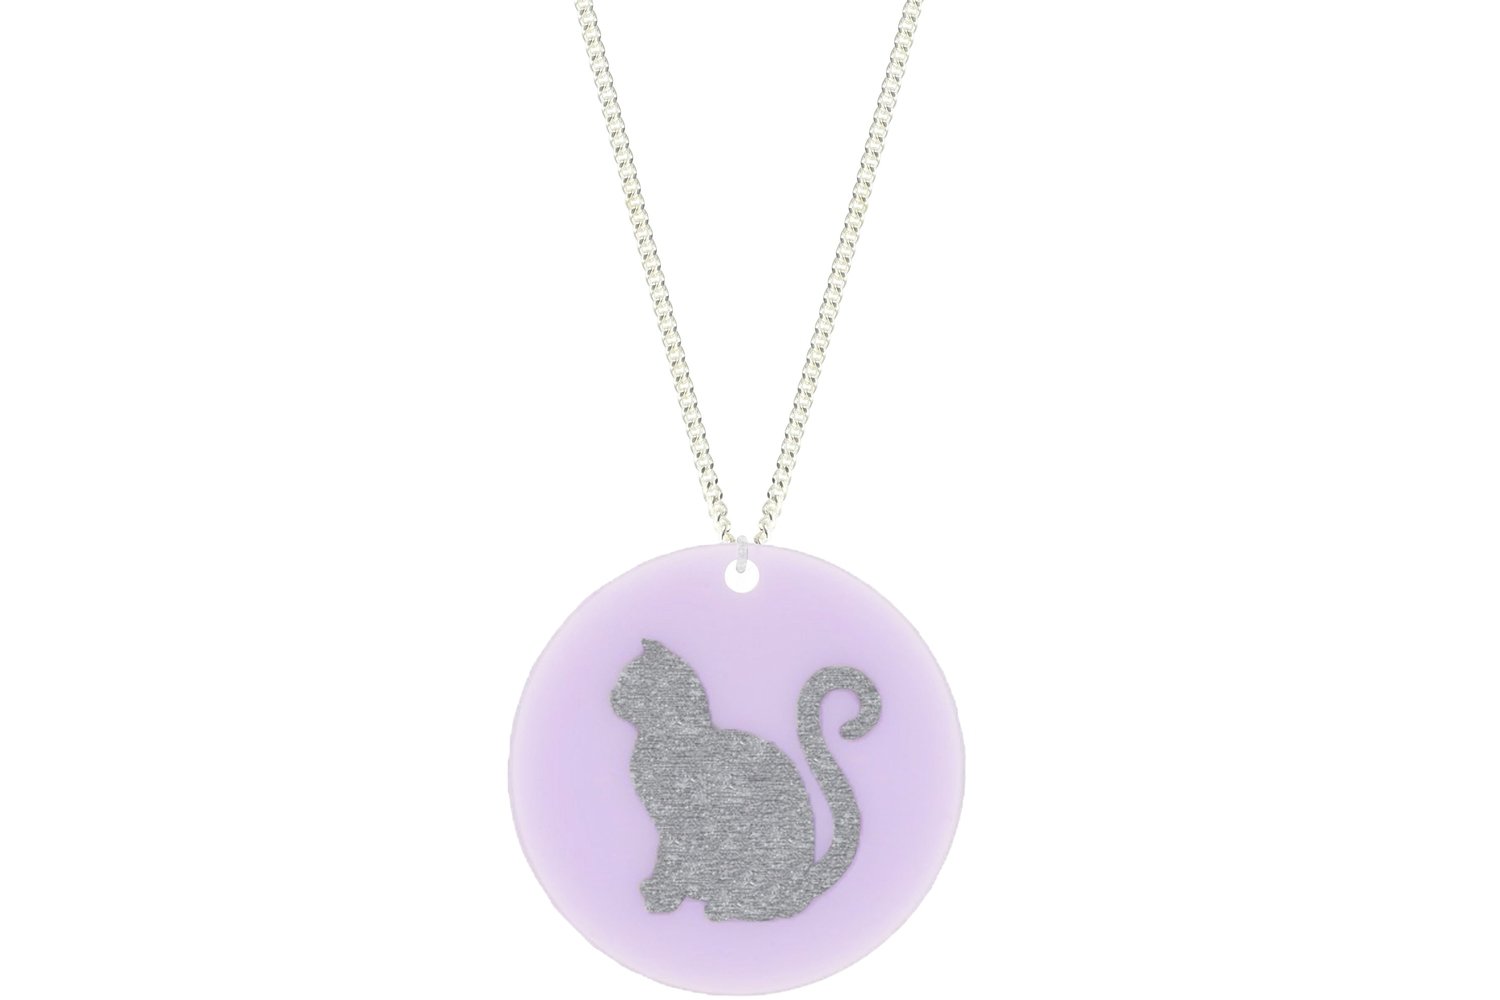 Cat Pendant Subtle Style Refined with Paint on Chain Necklace